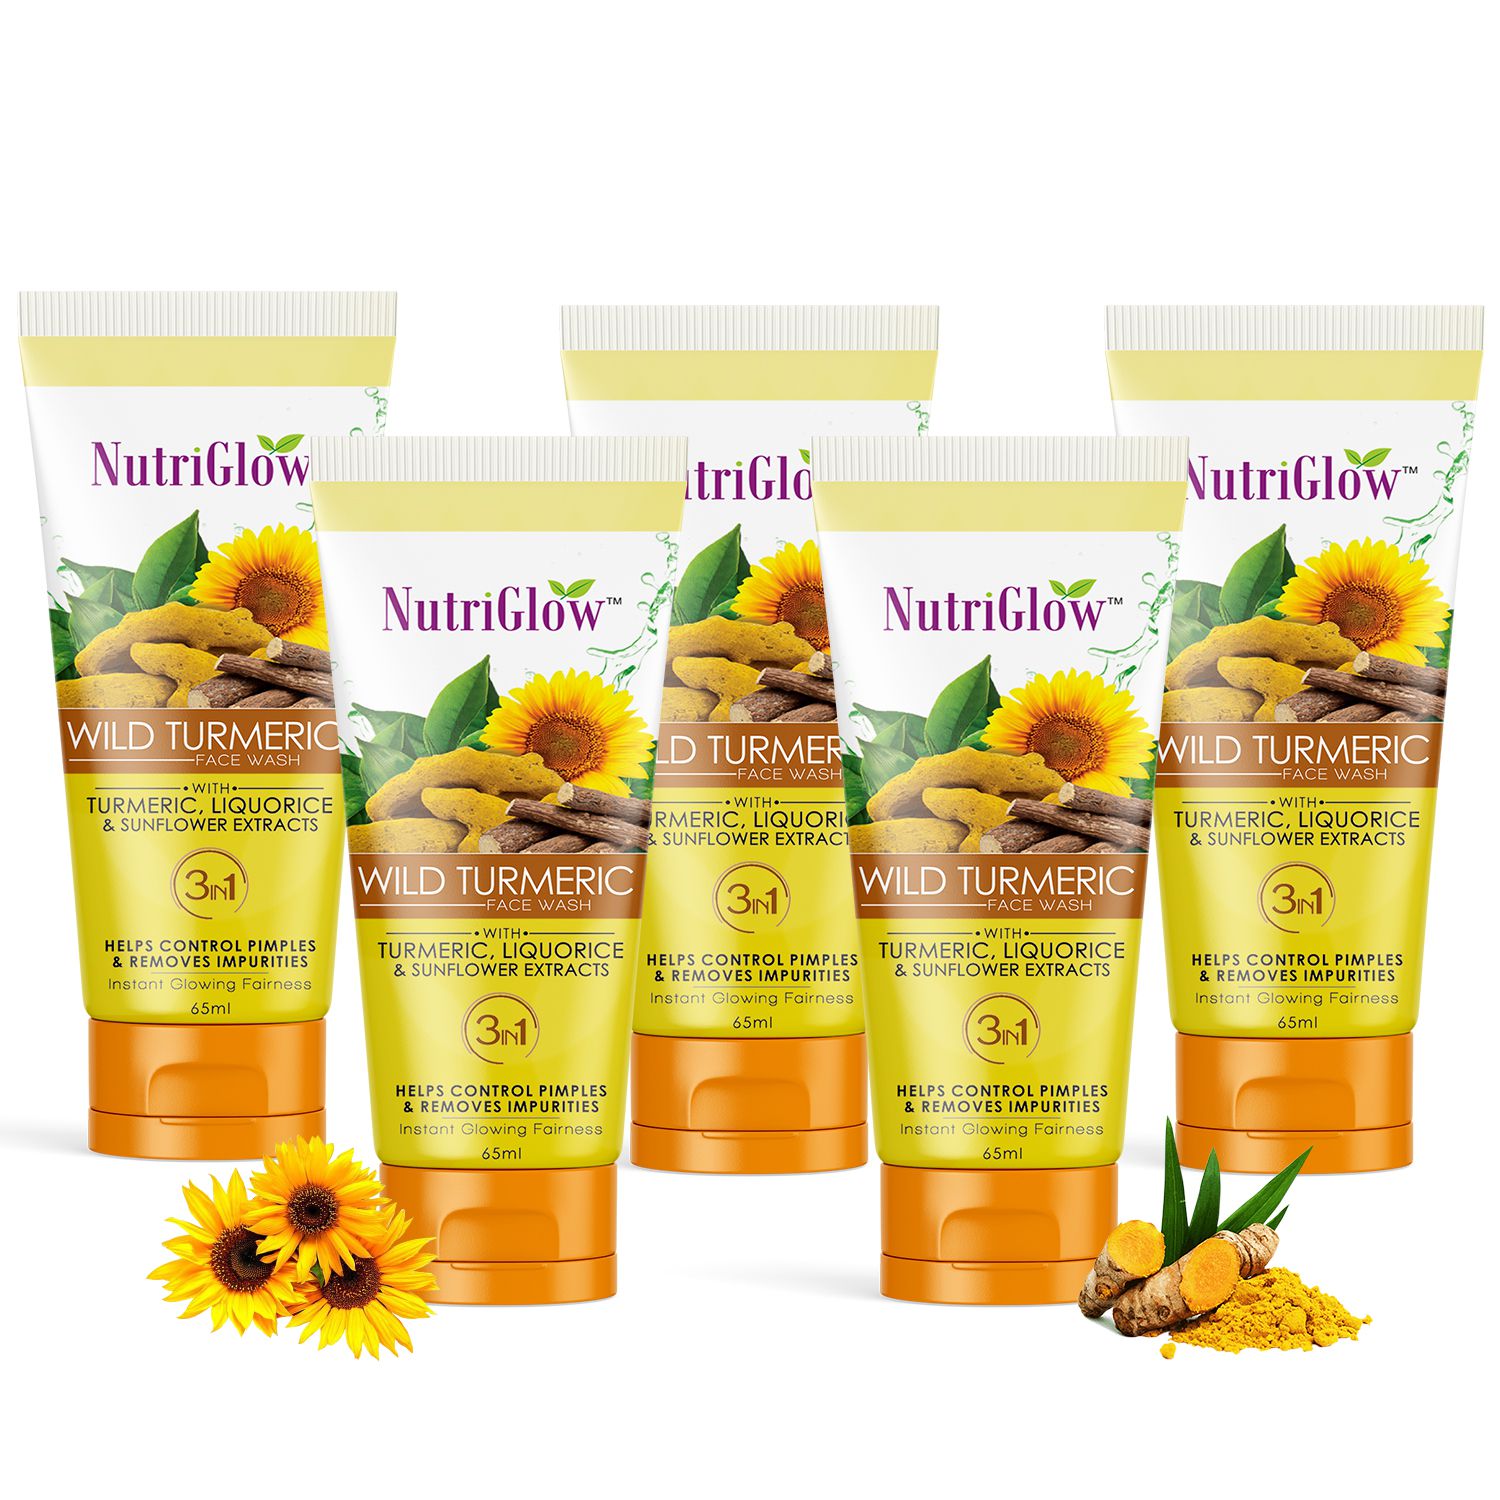 Nutriglow Wild Turmeric Face Wash 65ml Each (Pack of 5)